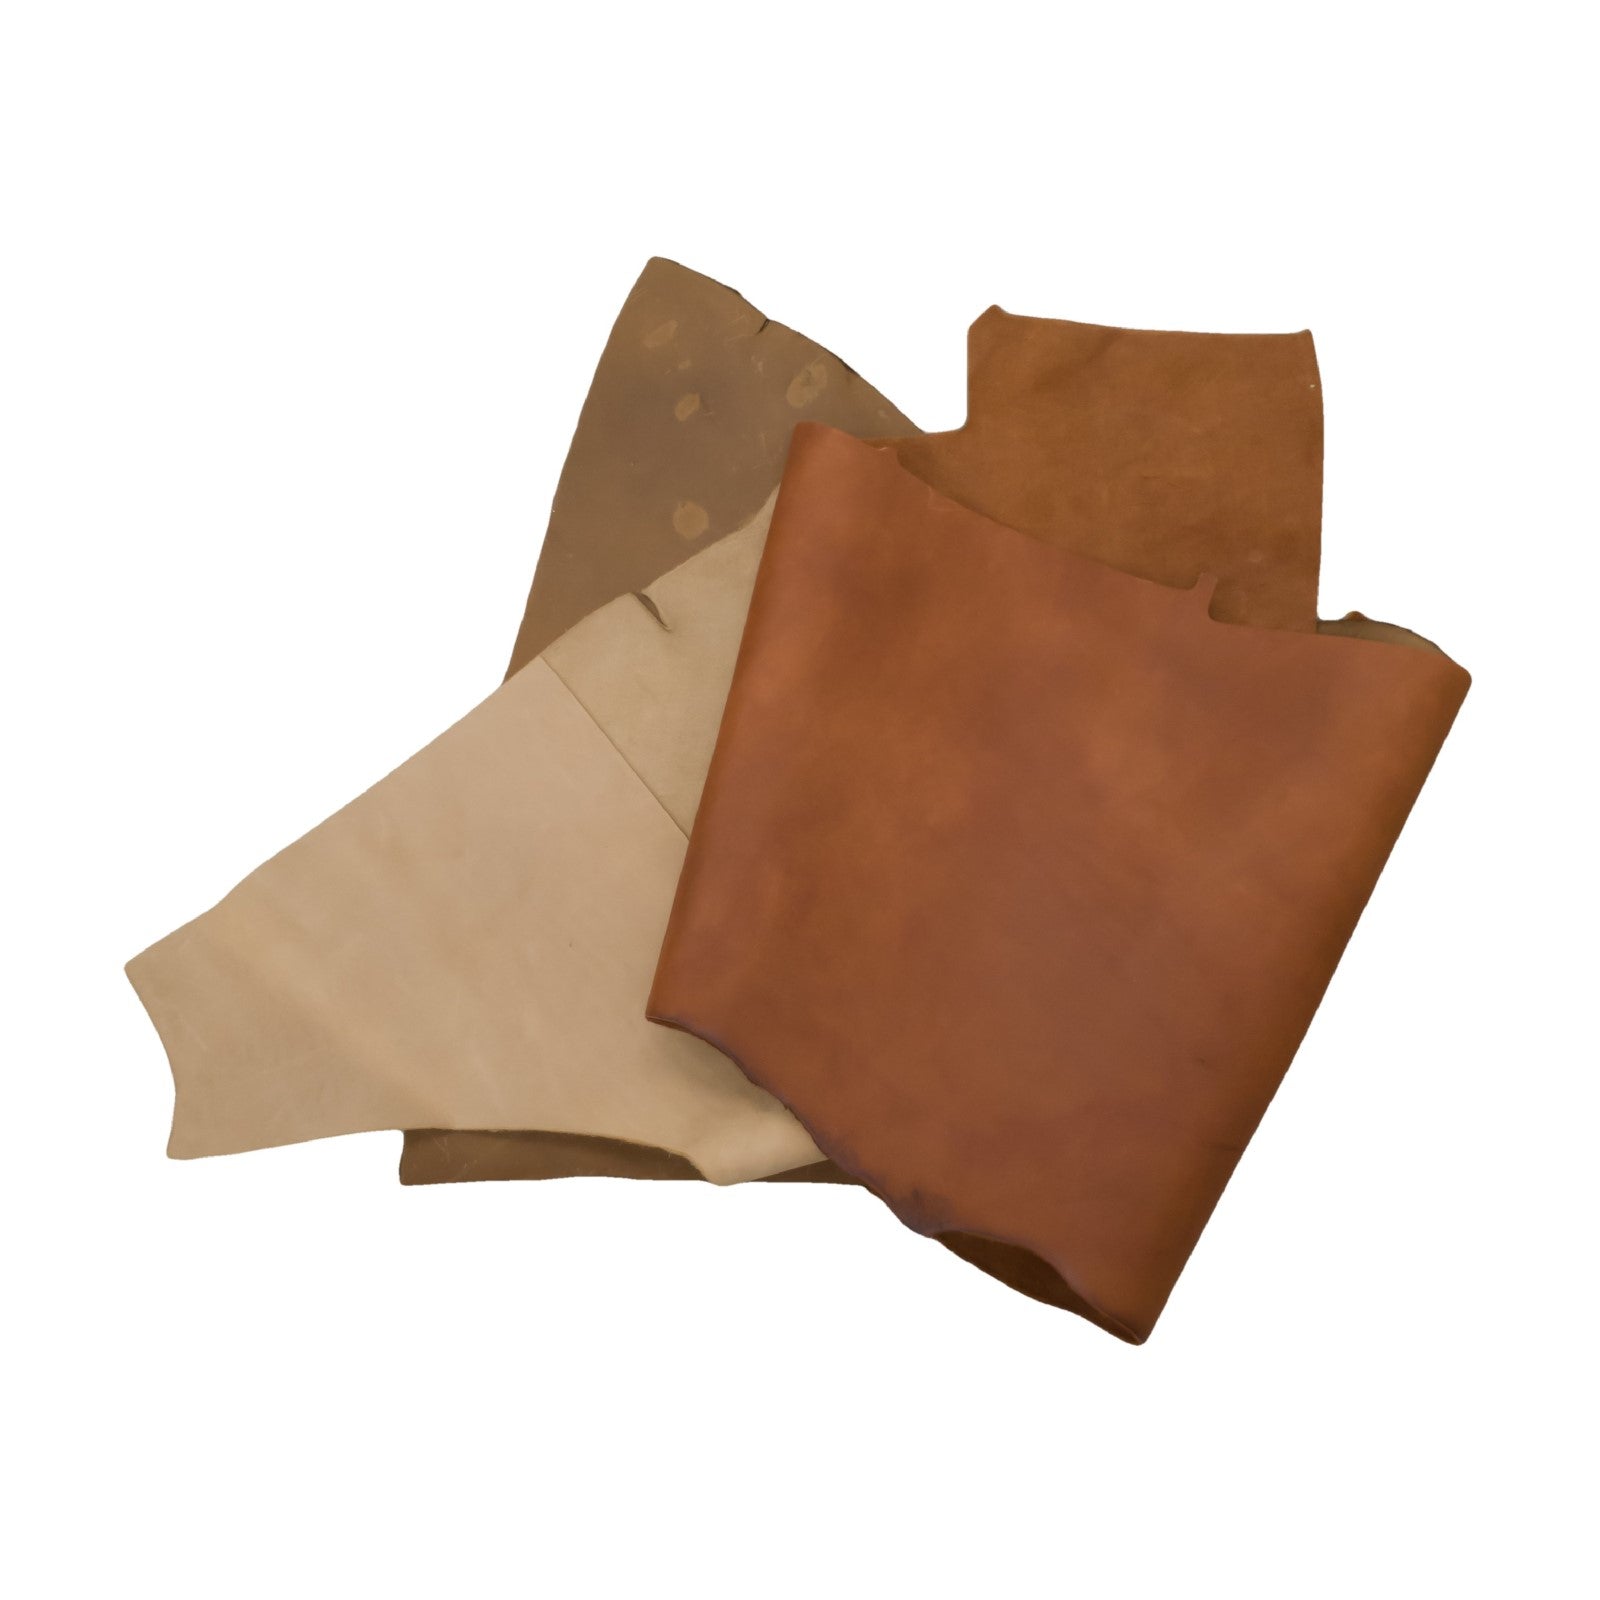 Earth Tones, 3-6 oz, Oil Tanned Remnant Bags, 3 lb | The Leather Guy